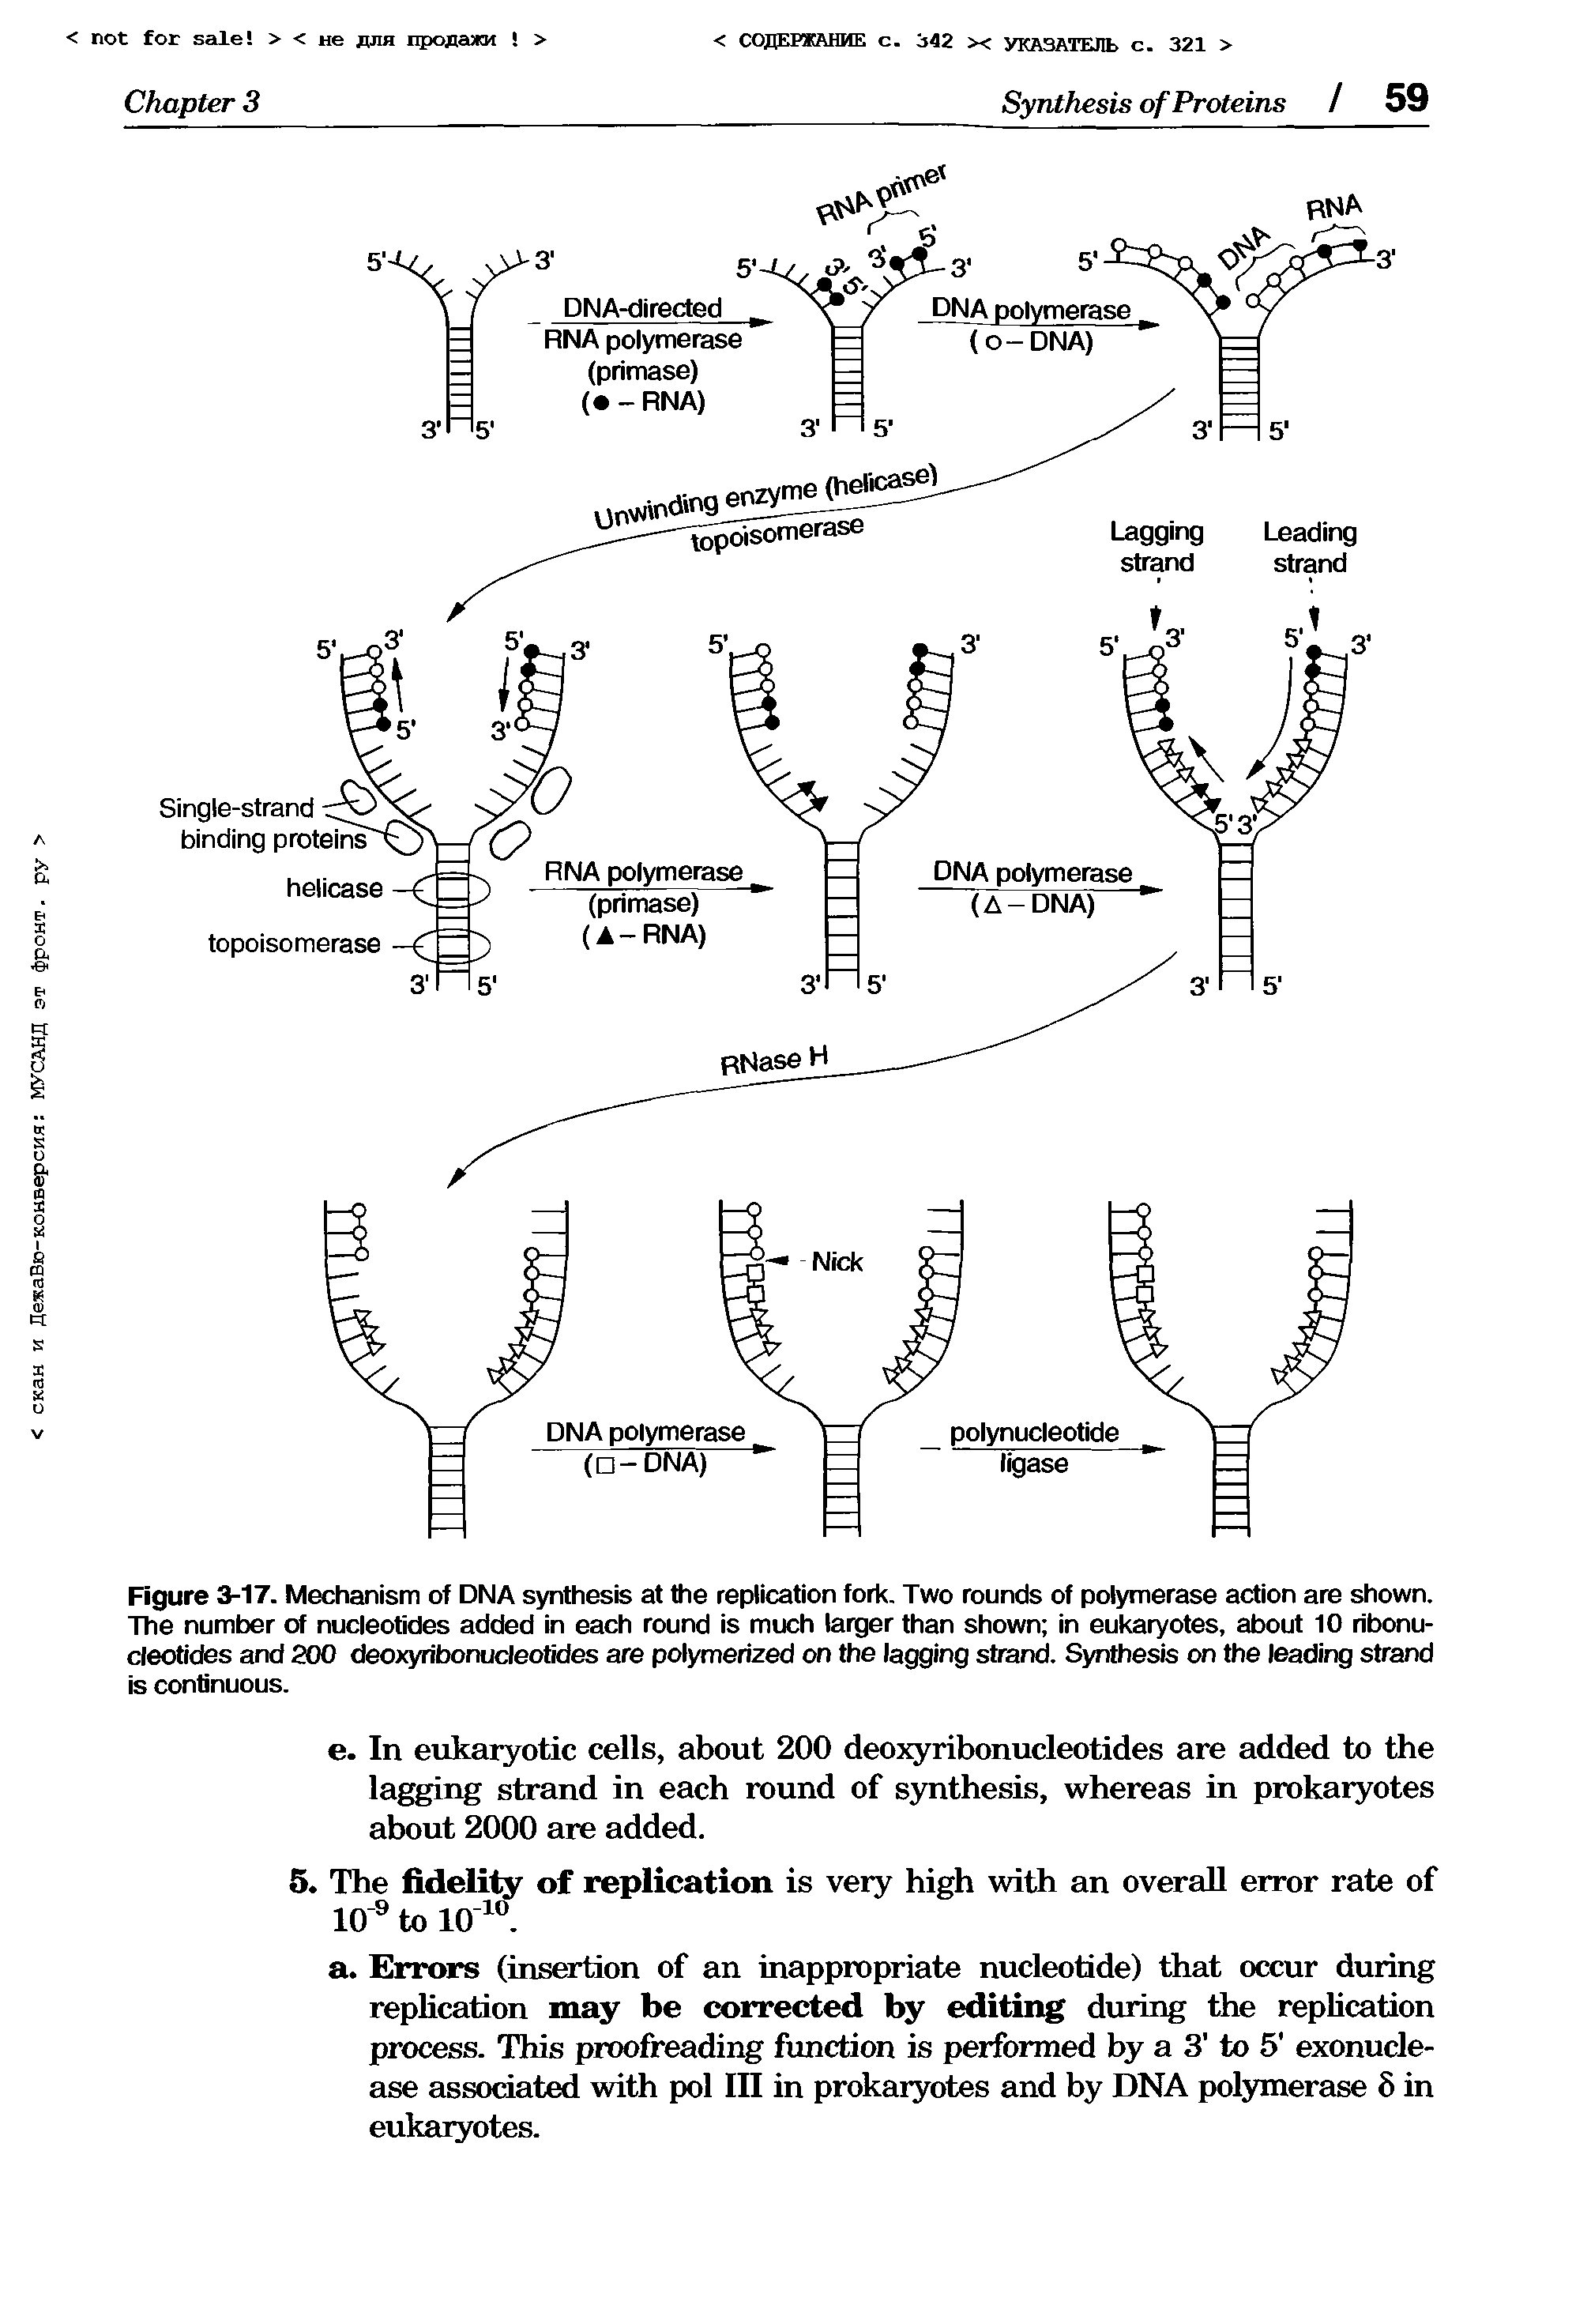 Figure 3-17. Mechanism of DNA synthesis at the replication fork. Two rounds of polymerase action are shown. The number of nucleotides added in each round is much larger than shown in eukaryotes, about 10 ribonucleotides and 200 deoxyribonucleotides are polymerized on the lagging strand. Synthesis on the leading strand is continuous.